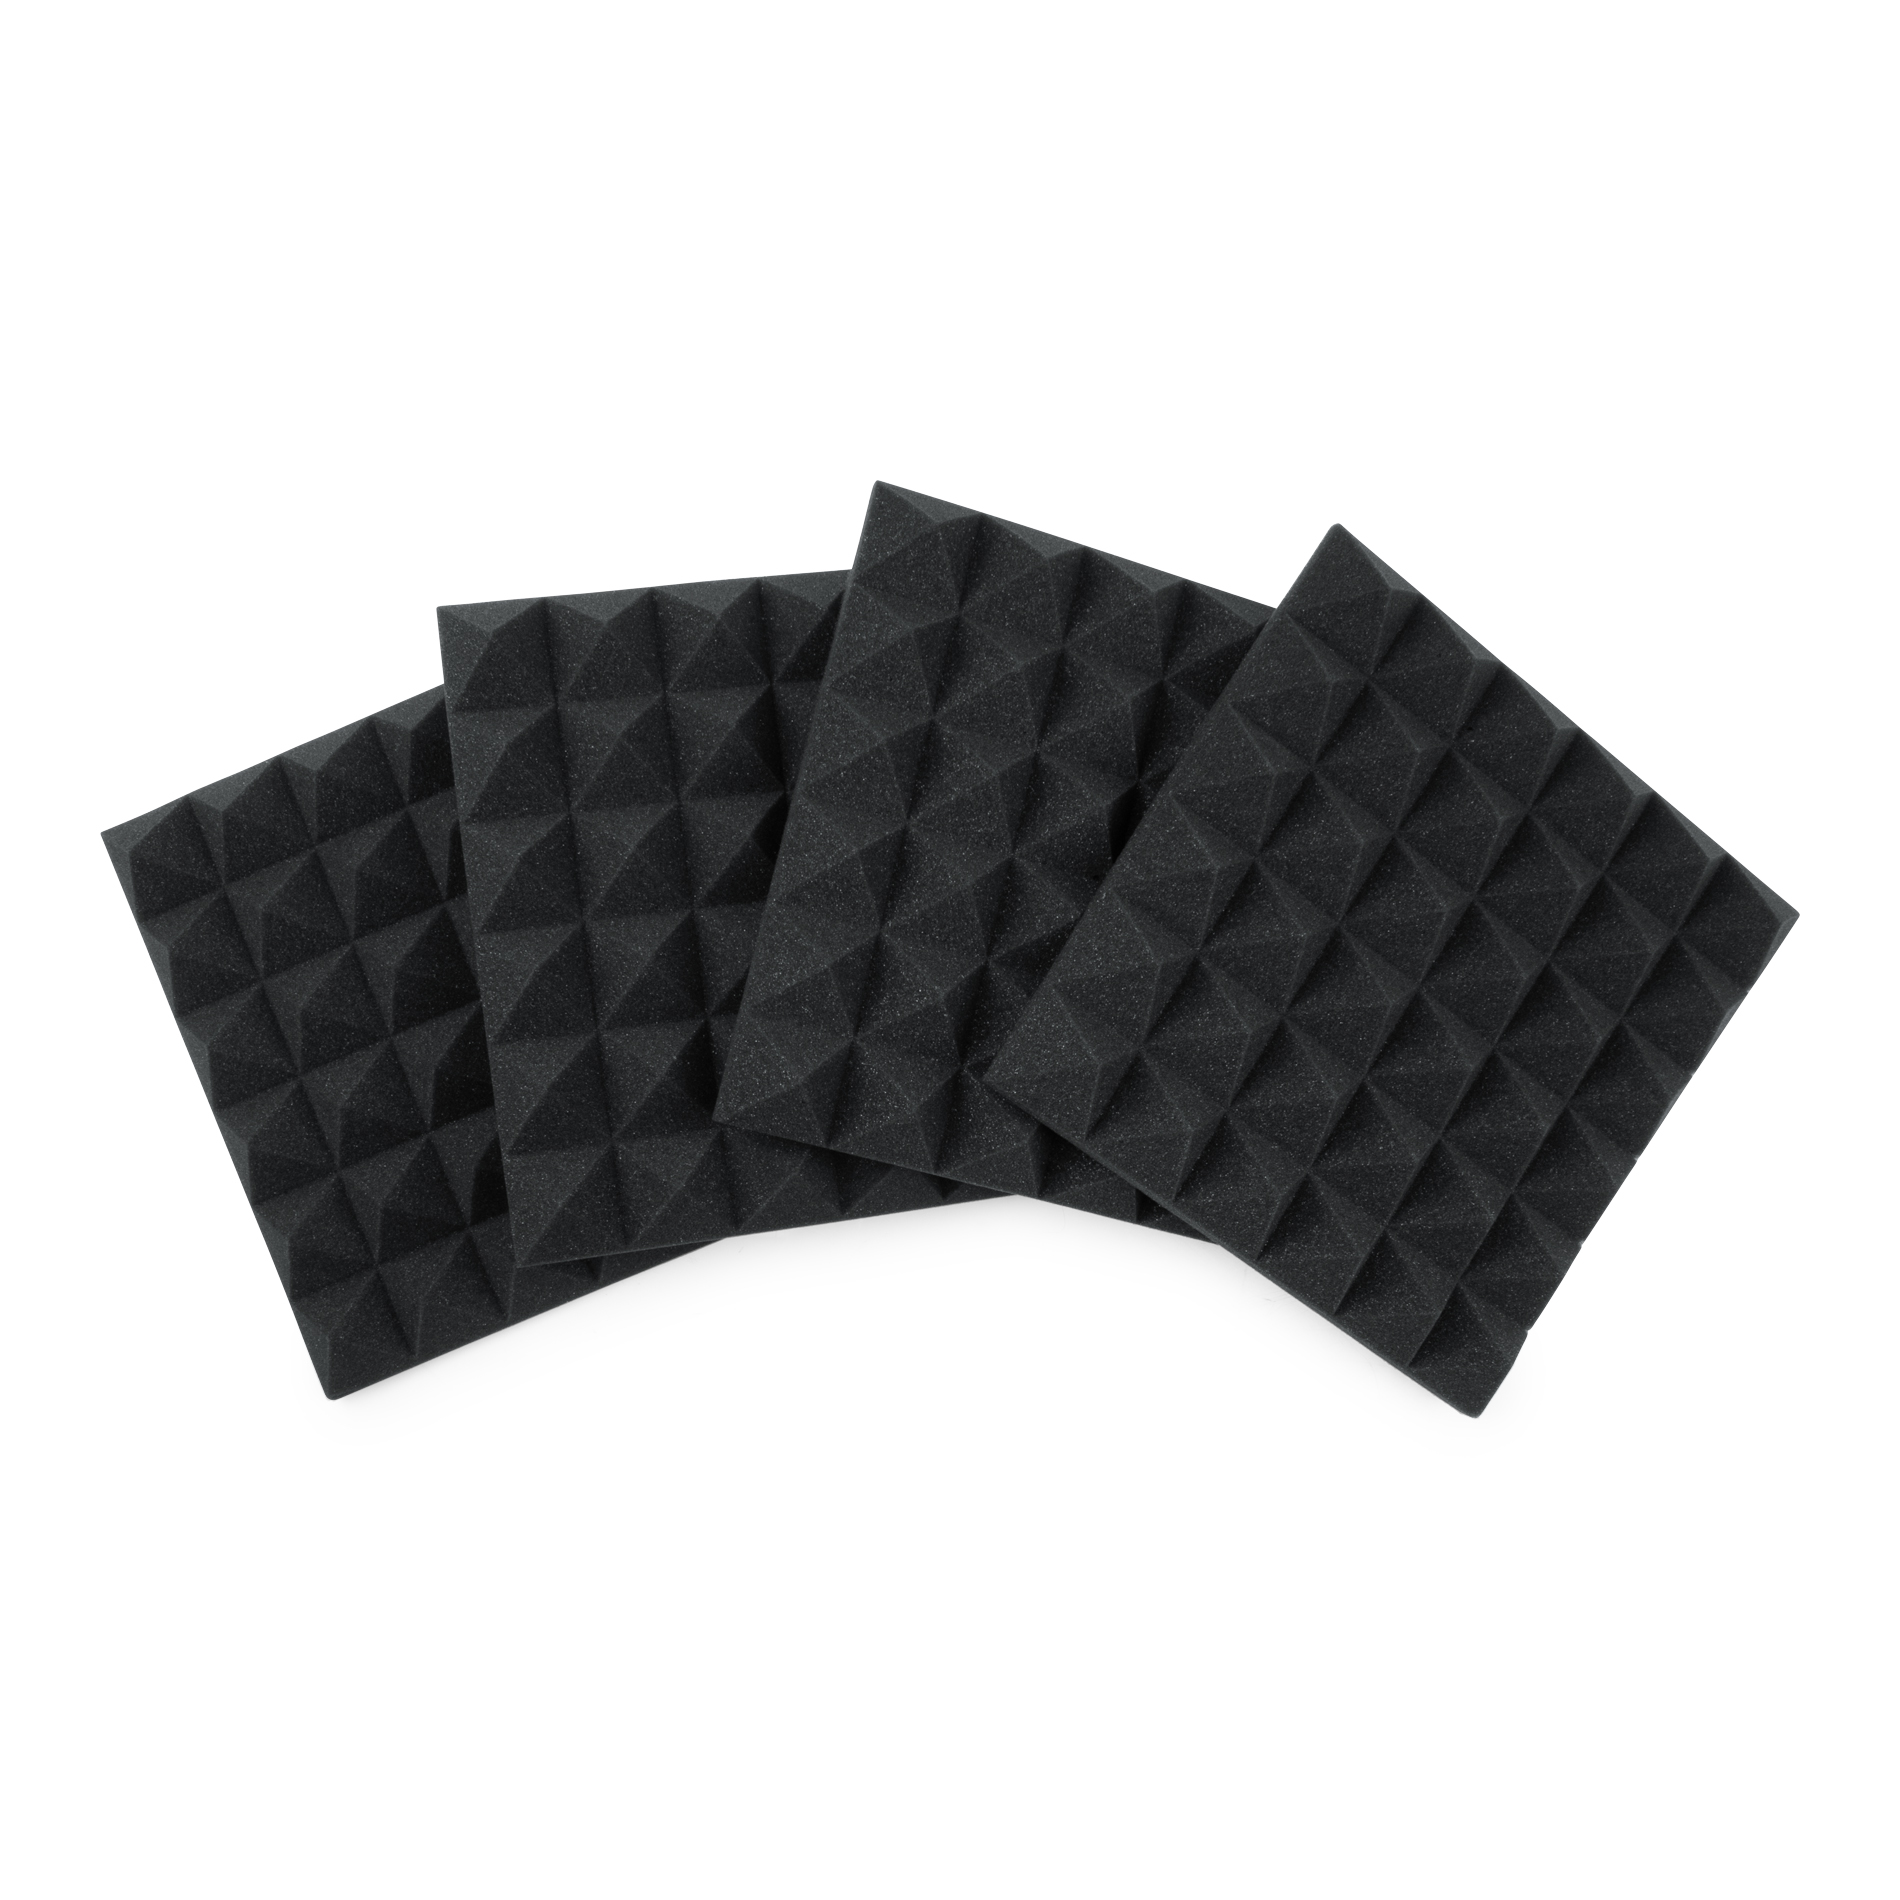 4 Pack of Charcoal 12×12″ Acoustic Pyramid Panel-GFW-ACPNL1212PCHA-4PK